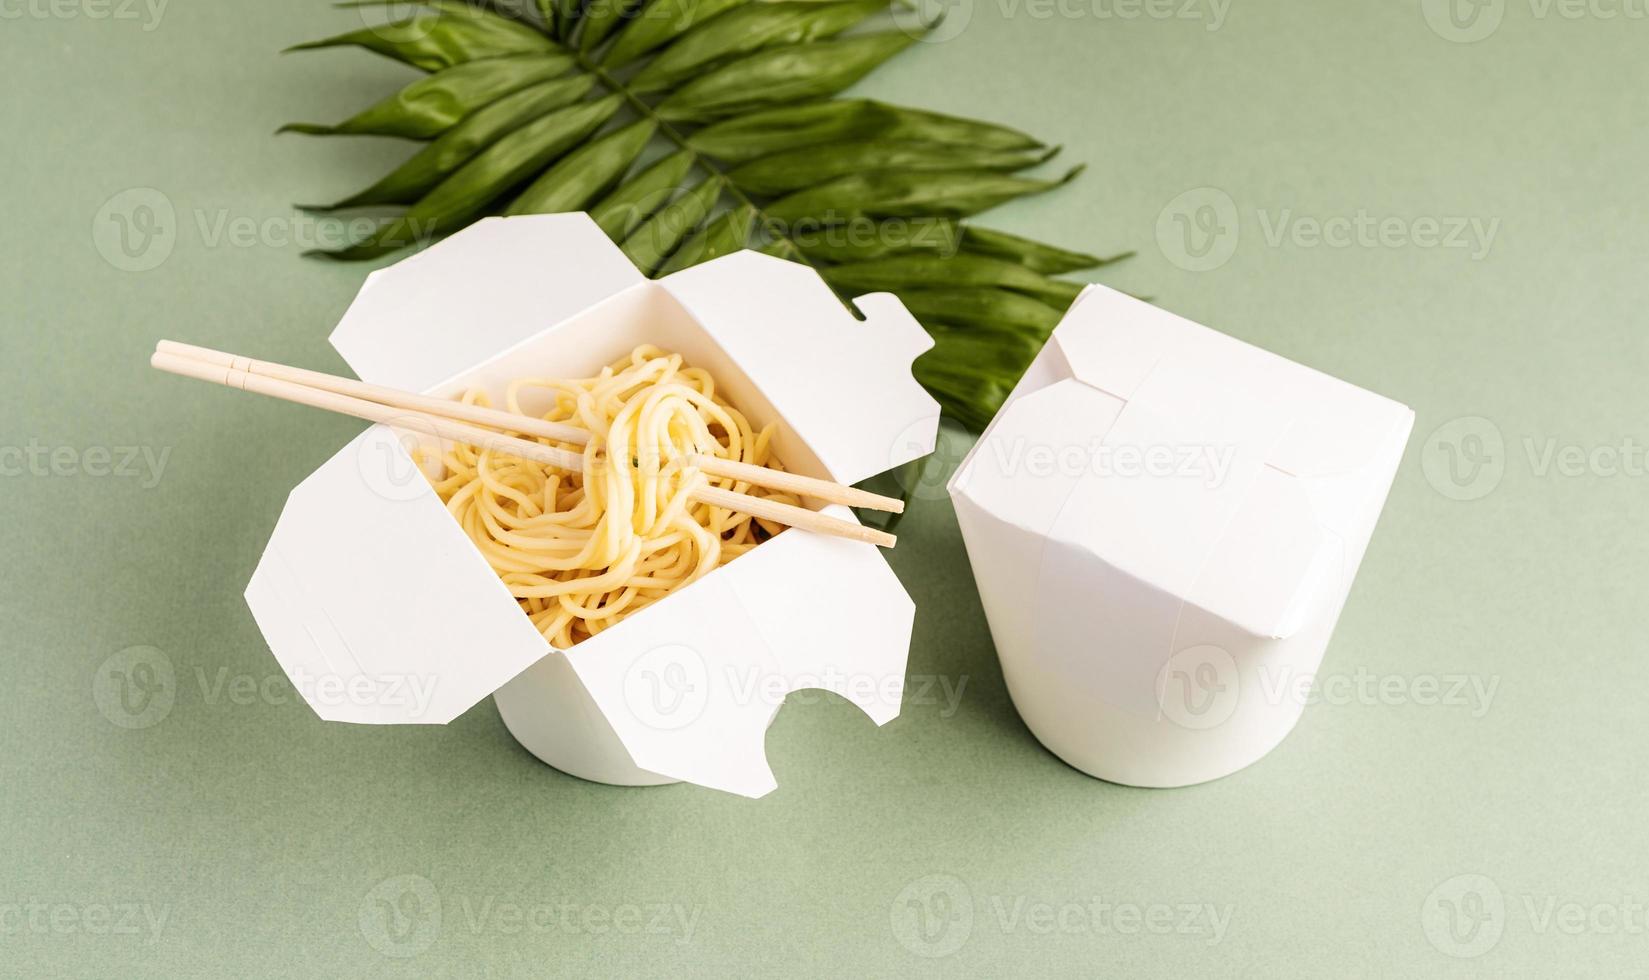 Opened WOK paper box with noodles and chopsticks photo